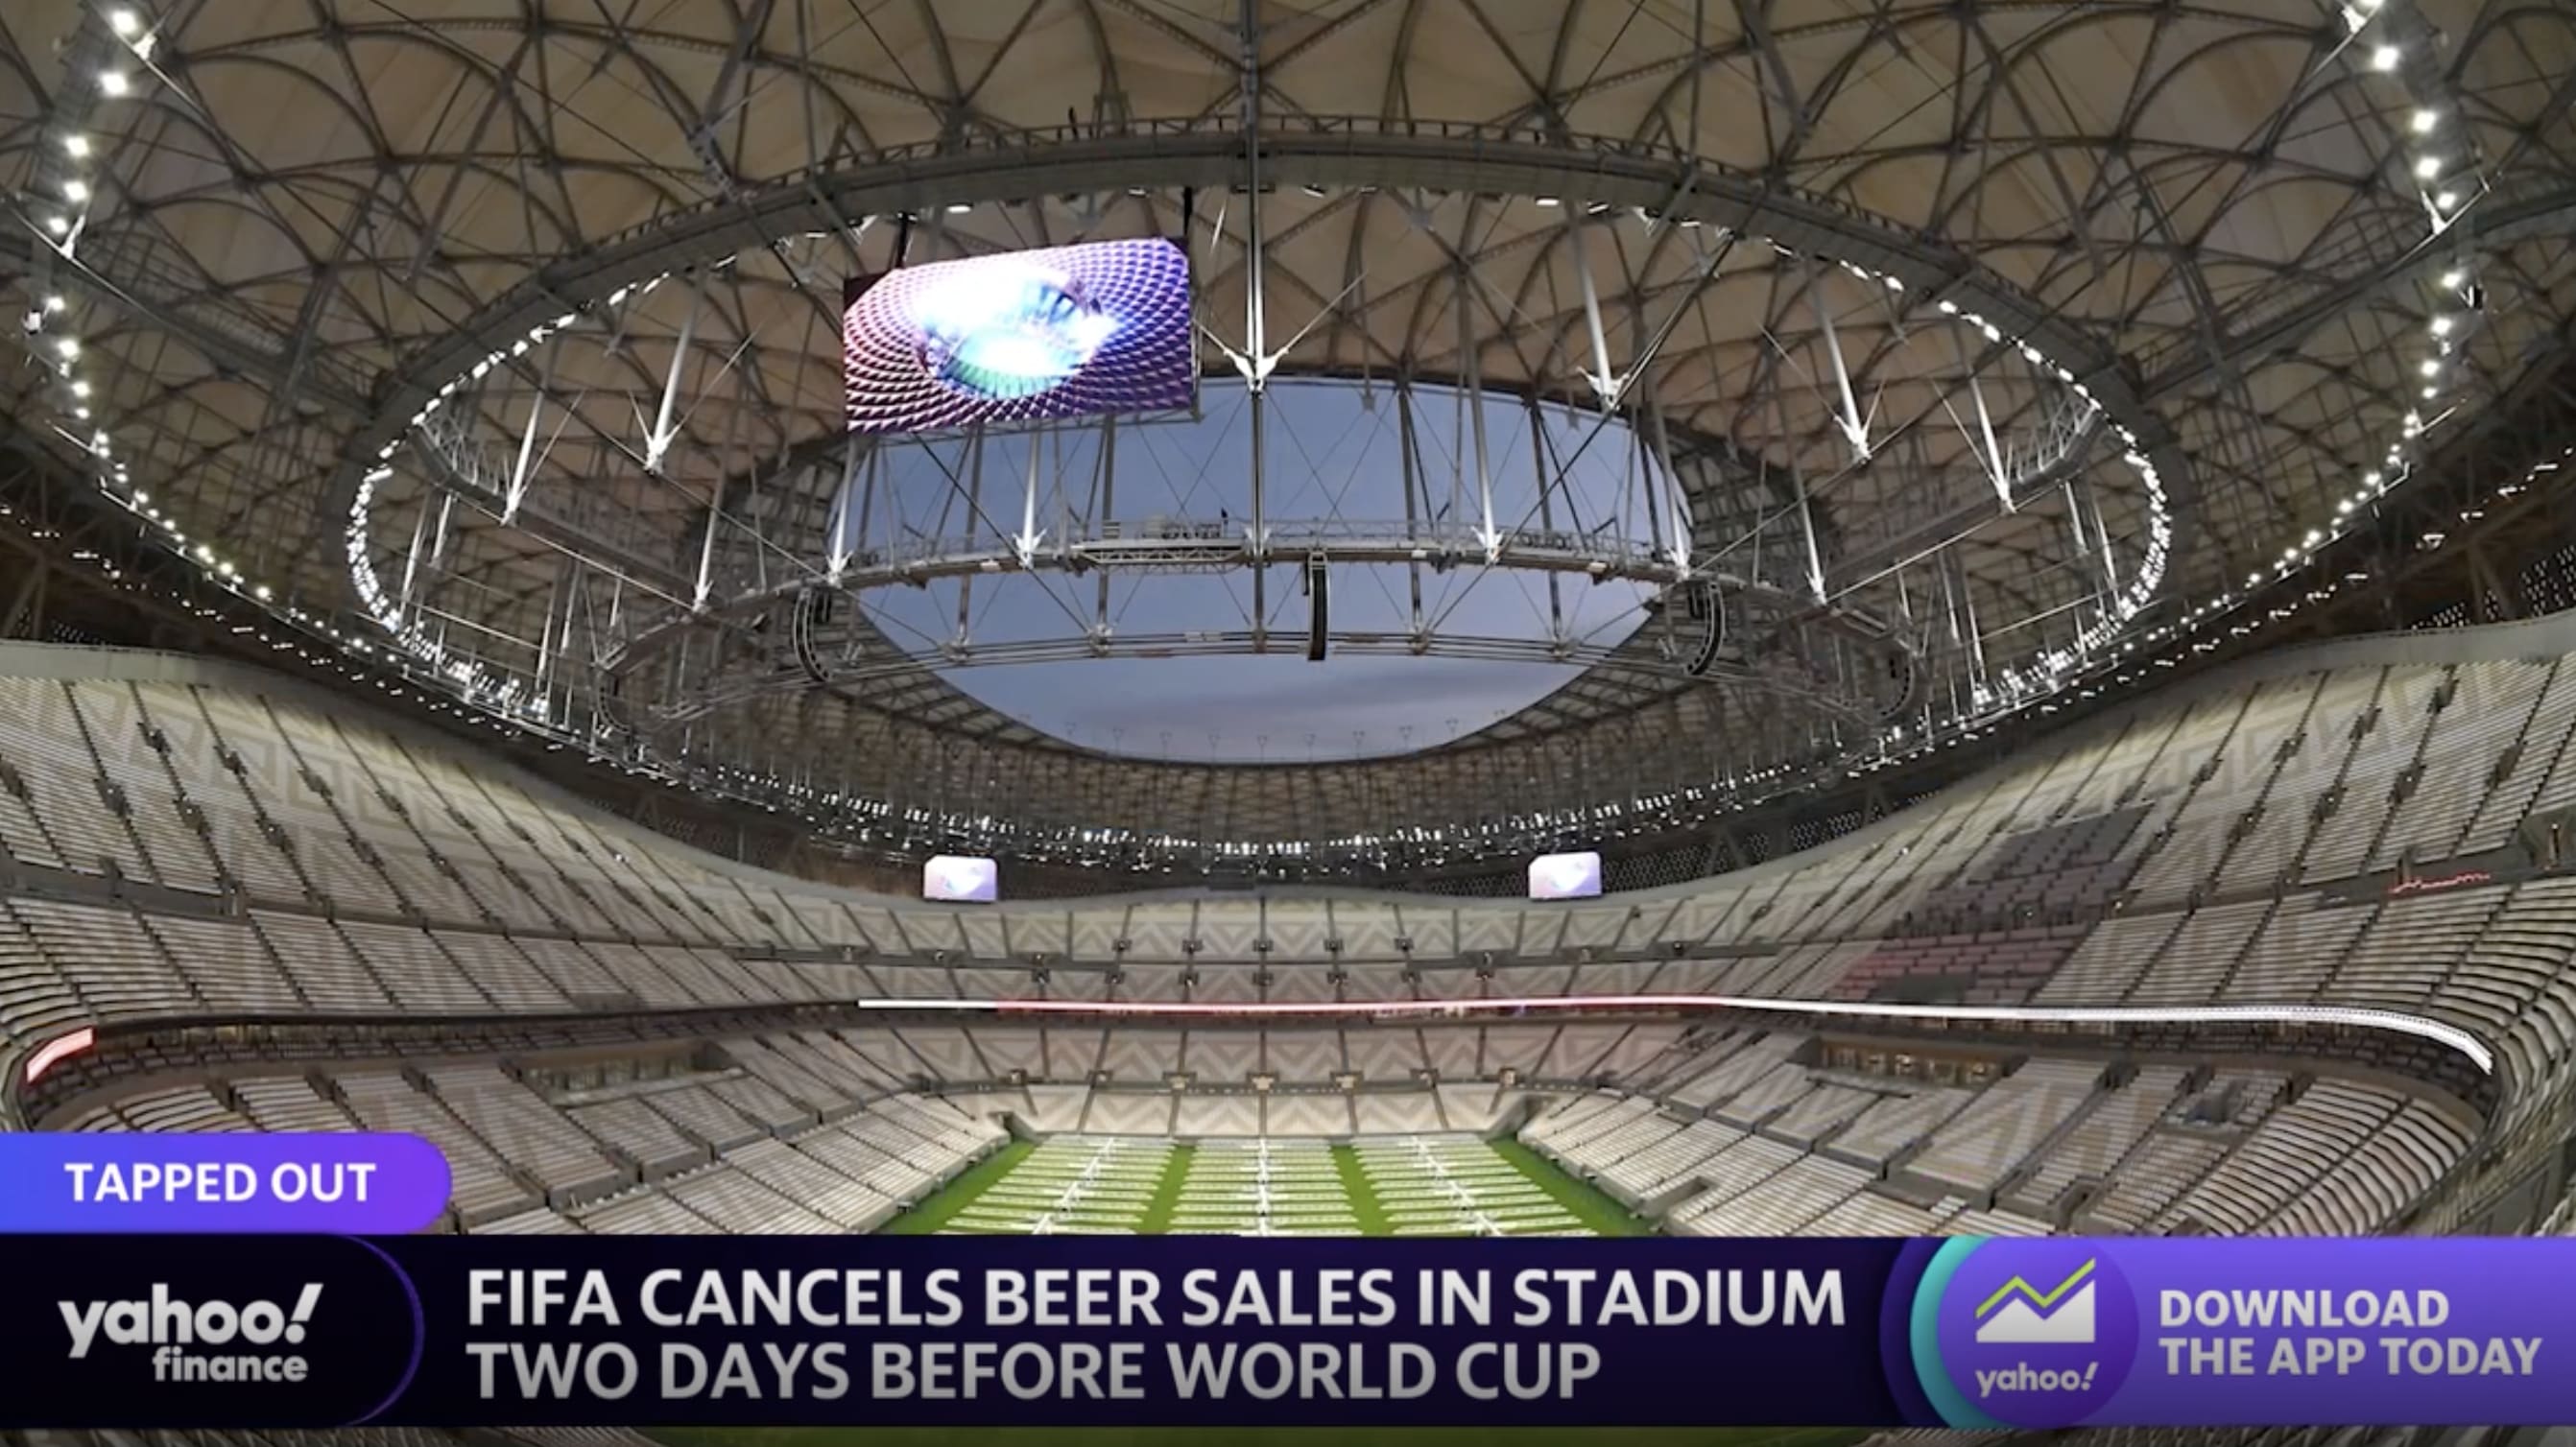 FIFA World Cup 2022: Stadiums to be alcohol free under Qatari curbs